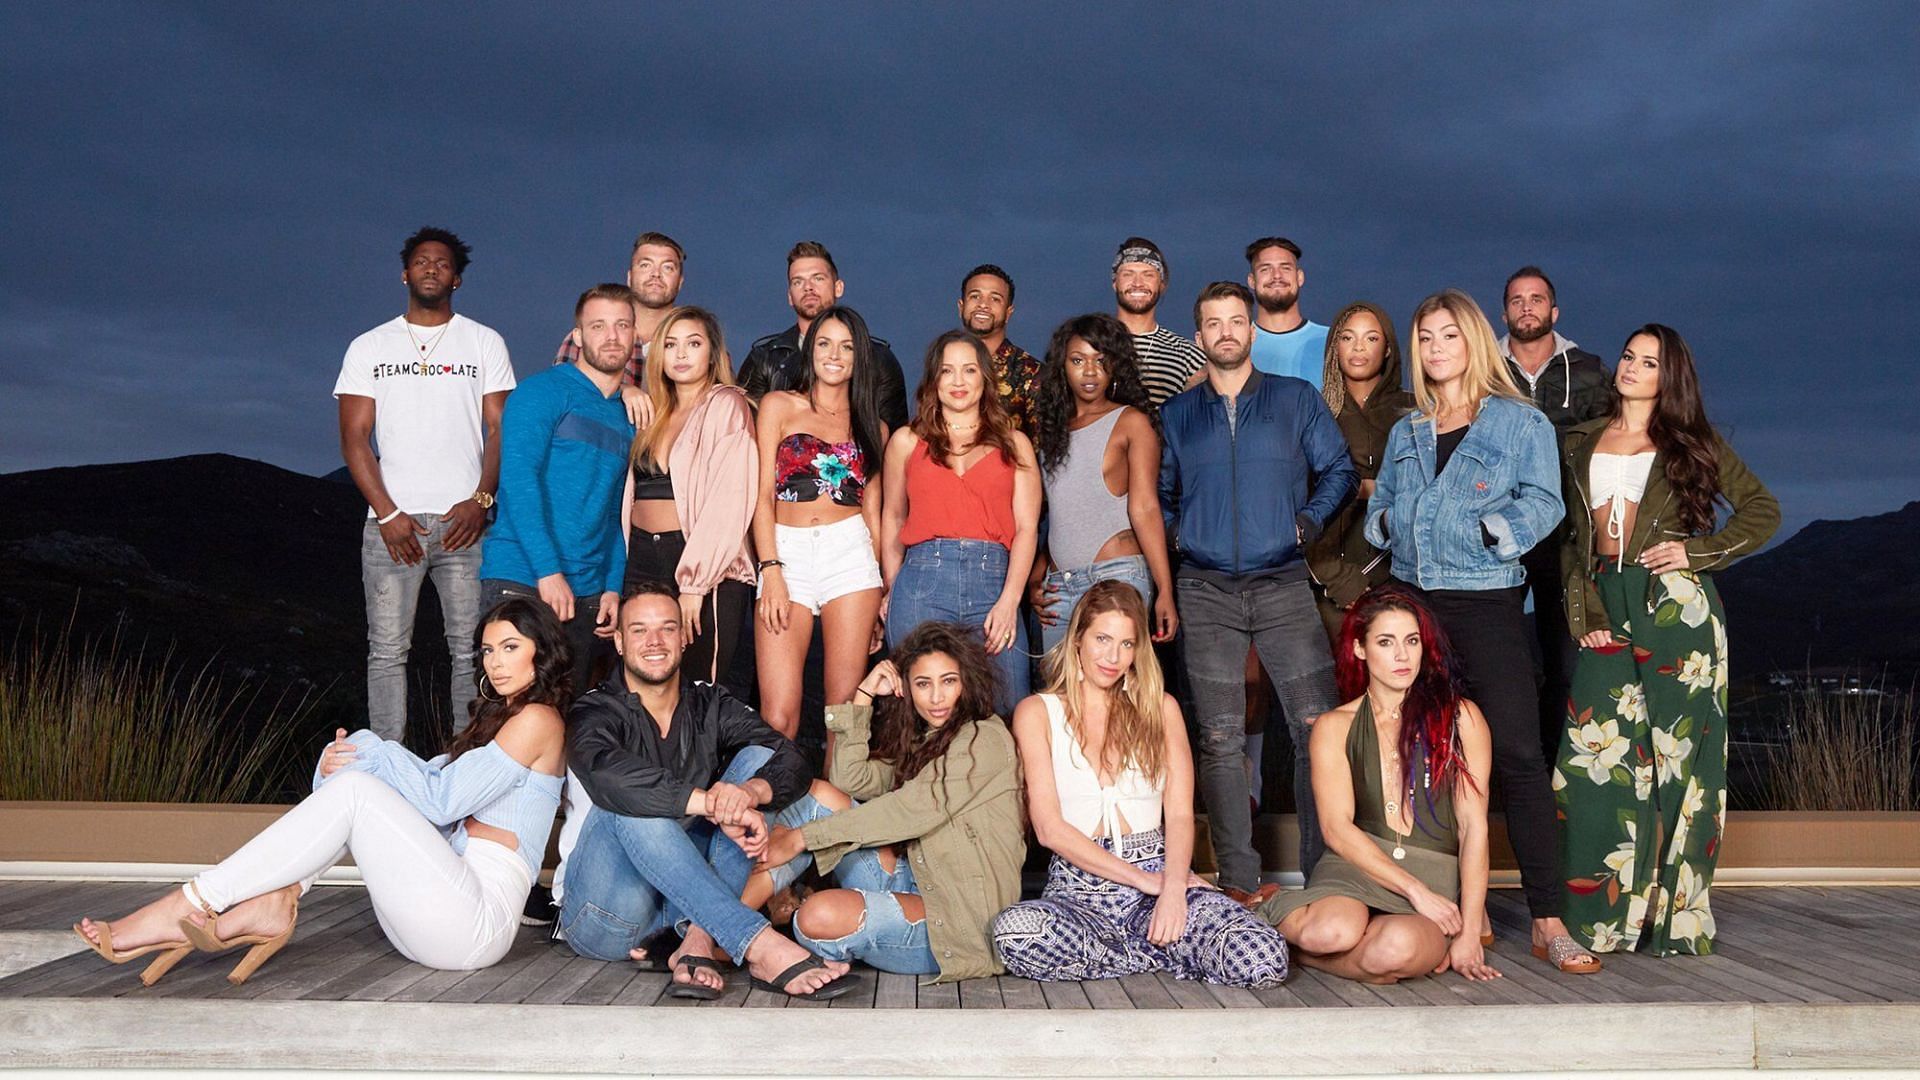 The cast of The Challenge: Final Reckoning (Image: The Challenge Wiki).